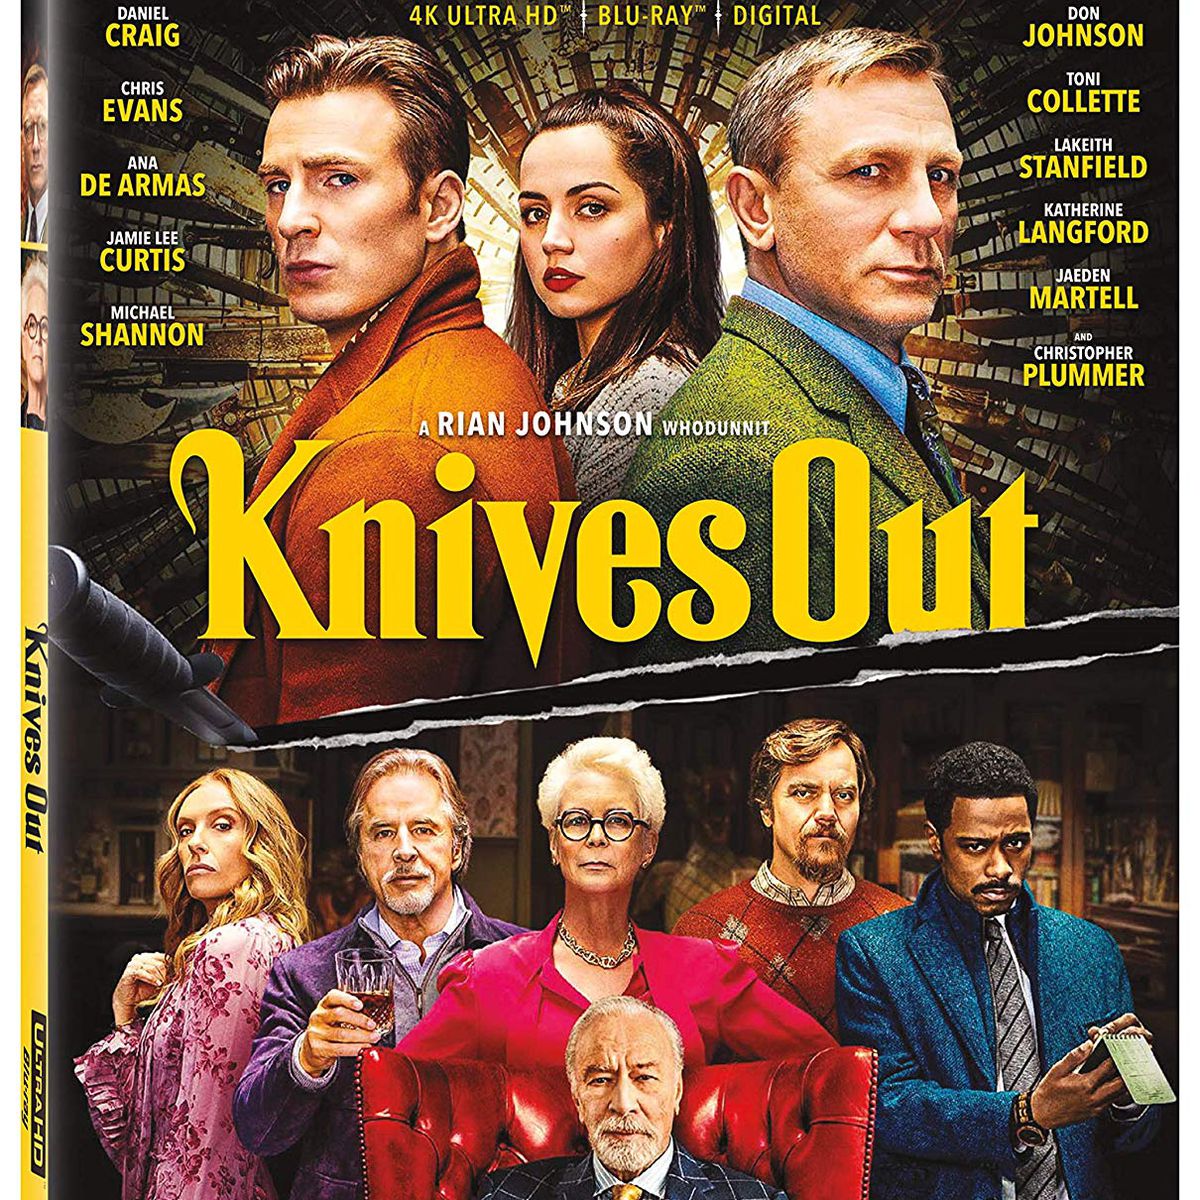 Cover art for the Knives Out 4K Blu-ray